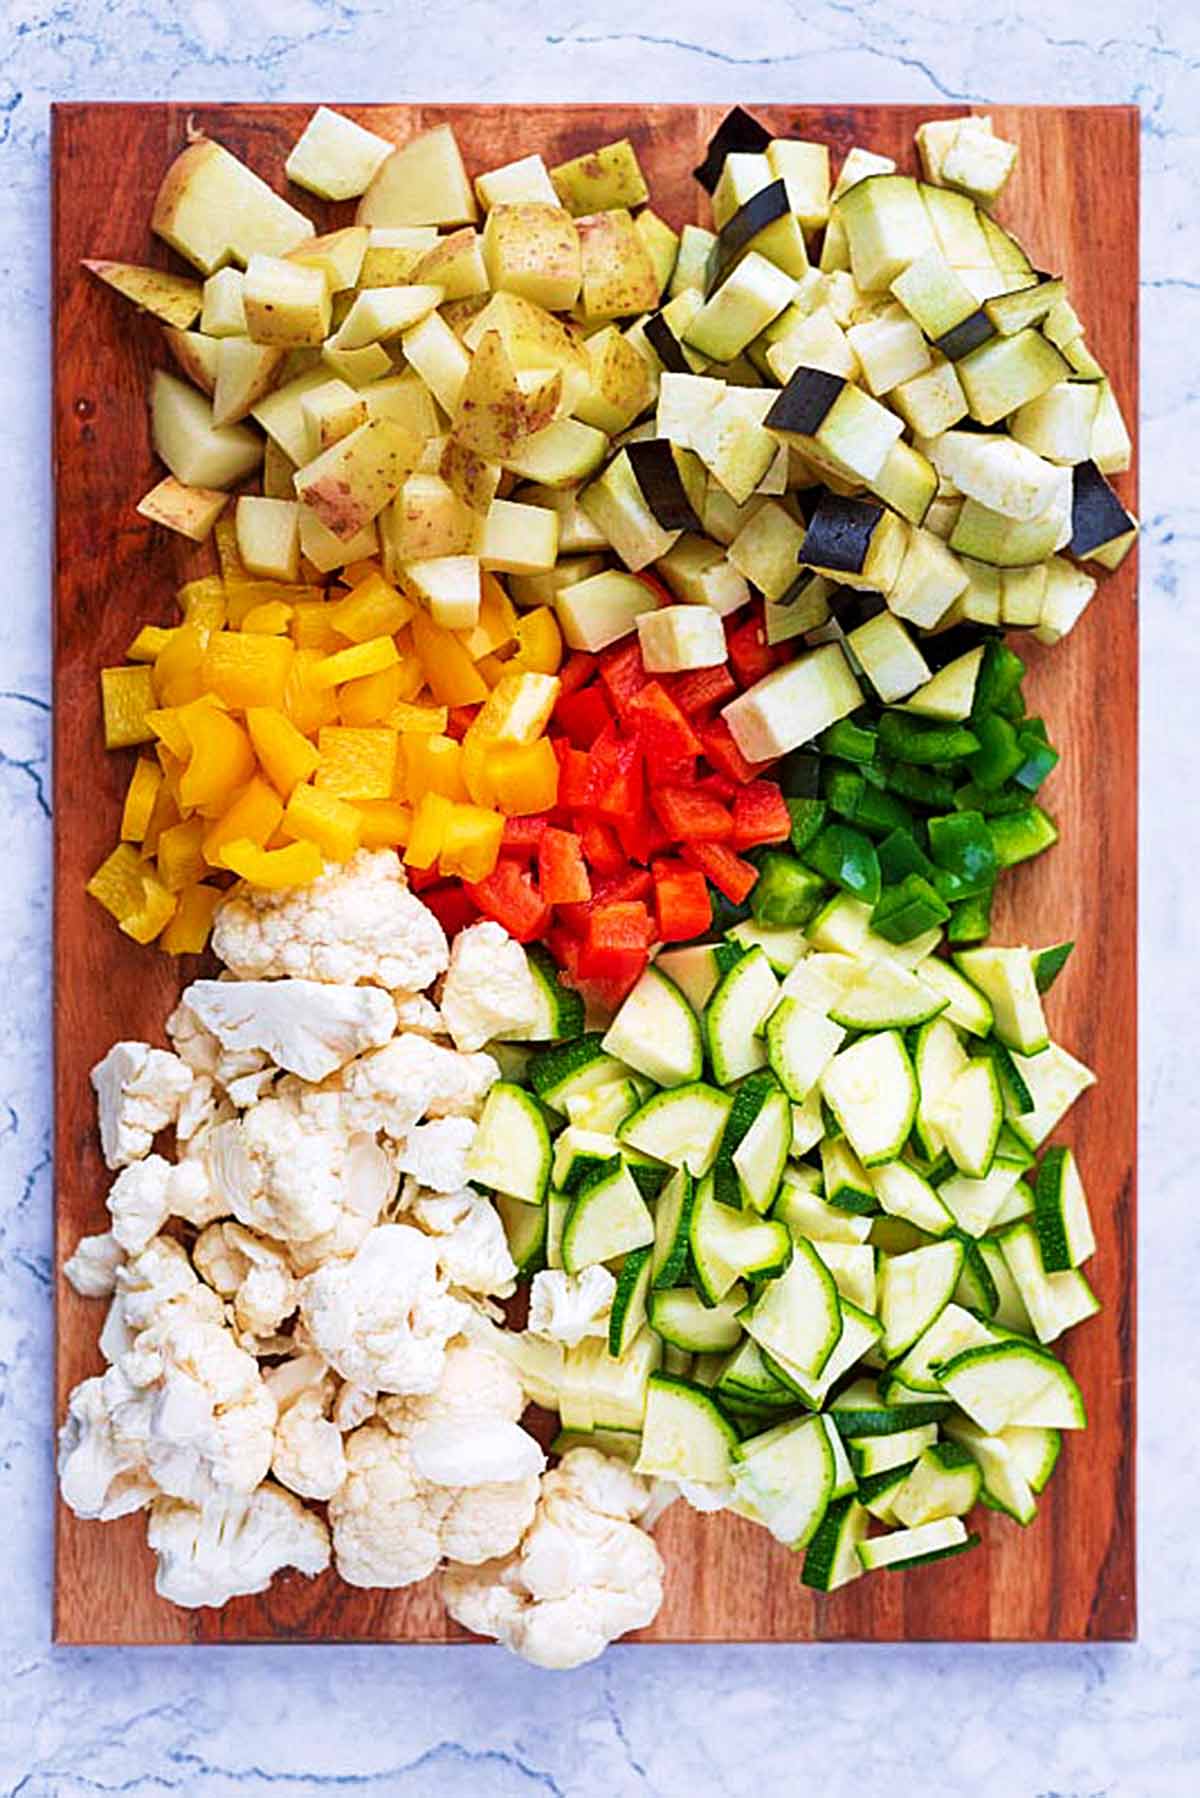 A wooden chopping board covered in chopped vegetables.